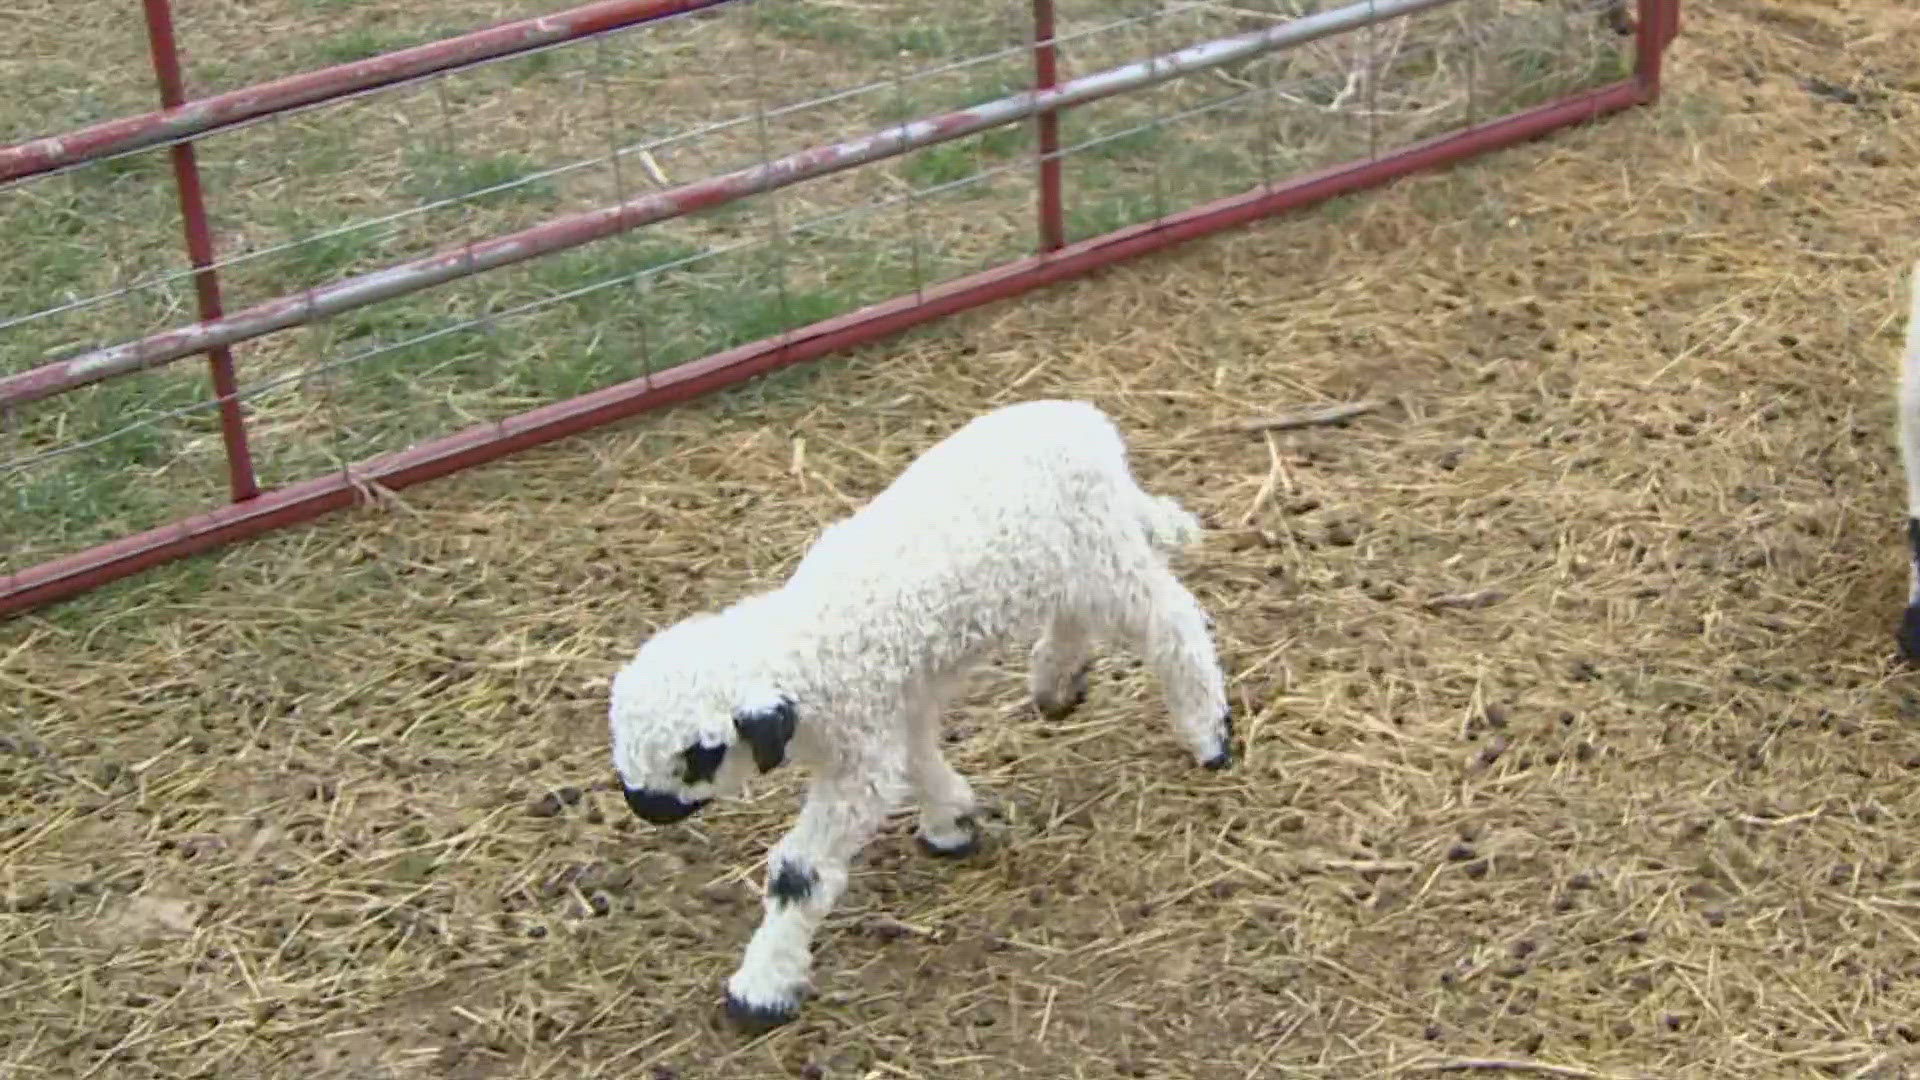 The cutest sheep in the world are making their debut on this earth. It's lambing season up in Weld County.